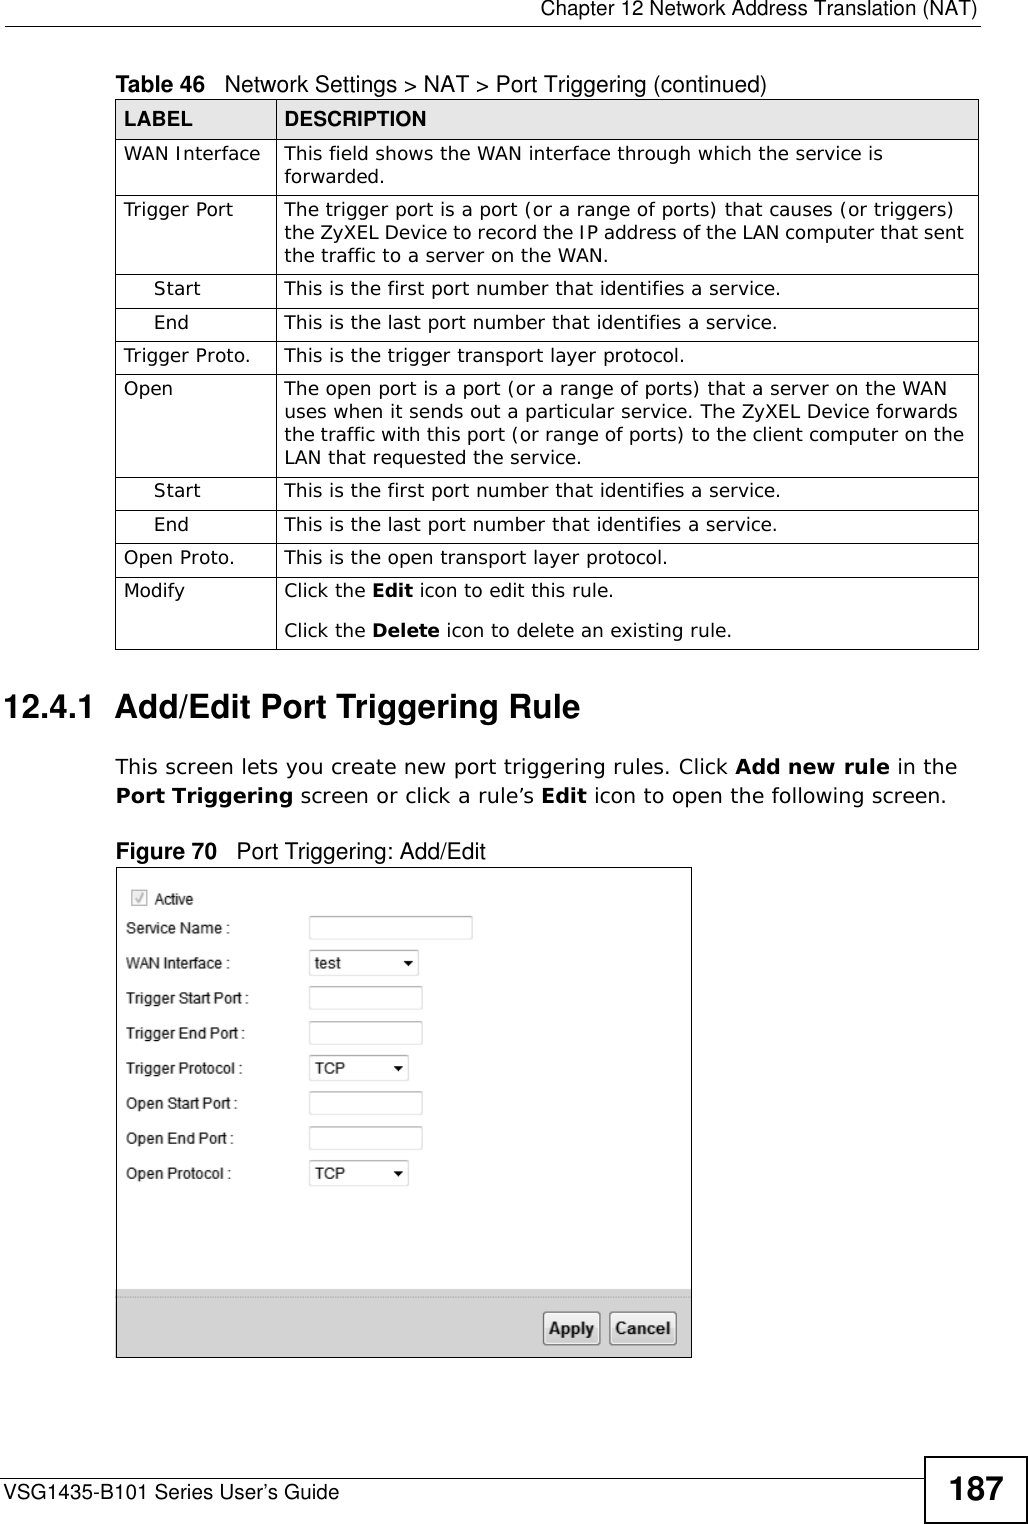  Chapter 12 Network Address Translation (NAT)VSG1435-B101 Series User’s Guide 18712.4.1  Add/Edit Port Triggering Rule This screen lets you create new port triggering rules. Click Add new rule in the Port Triggering screen or click a rule’s Edit icon to open the following screen.Figure 70   Port Triggering: Add/Edit WAN Interface This field shows the WAN interface through which the service is forwarded.Trigger Port The trigger port is a port (or a range of ports) that causes (or triggers) the ZyXEL Device to record the IP address of the LAN computer that sent the traffic to a server on the WAN.Start This is the first port number that identifies a service.End This is the last port number that identifies a service.Trigger Proto. This is the trigger transport layer protocol. Open The open port is a port (or a range of ports) that a server on the WAN uses when it sends out a particular service. The ZyXEL Device forwards the traffic with this port (or range of ports) to the client computer on the LAN that requested the service. Start This is the first port number that identifies a service.End This is the last port number that identifies a service.Open Proto. This is the open transport layer protocol.Modify Click the Edit icon to edit this rule.Click the Delete icon to delete an existing rule. Table 46   Network Settings &gt; NAT &gt; Port Triggering (continued)LABEL DESCRIPTION